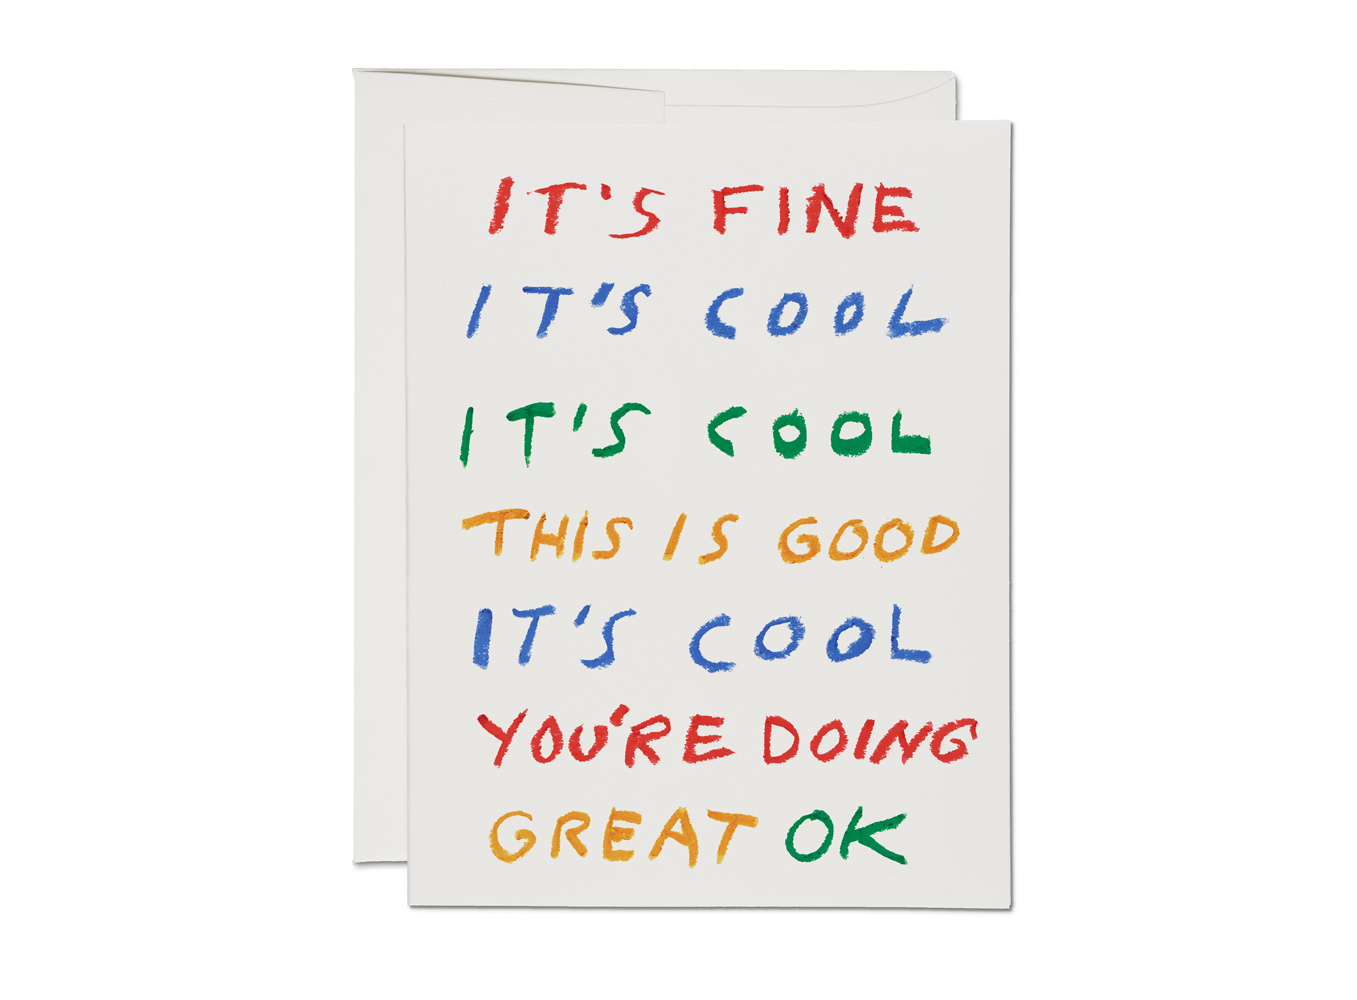 This Is Good encouragement greeting card